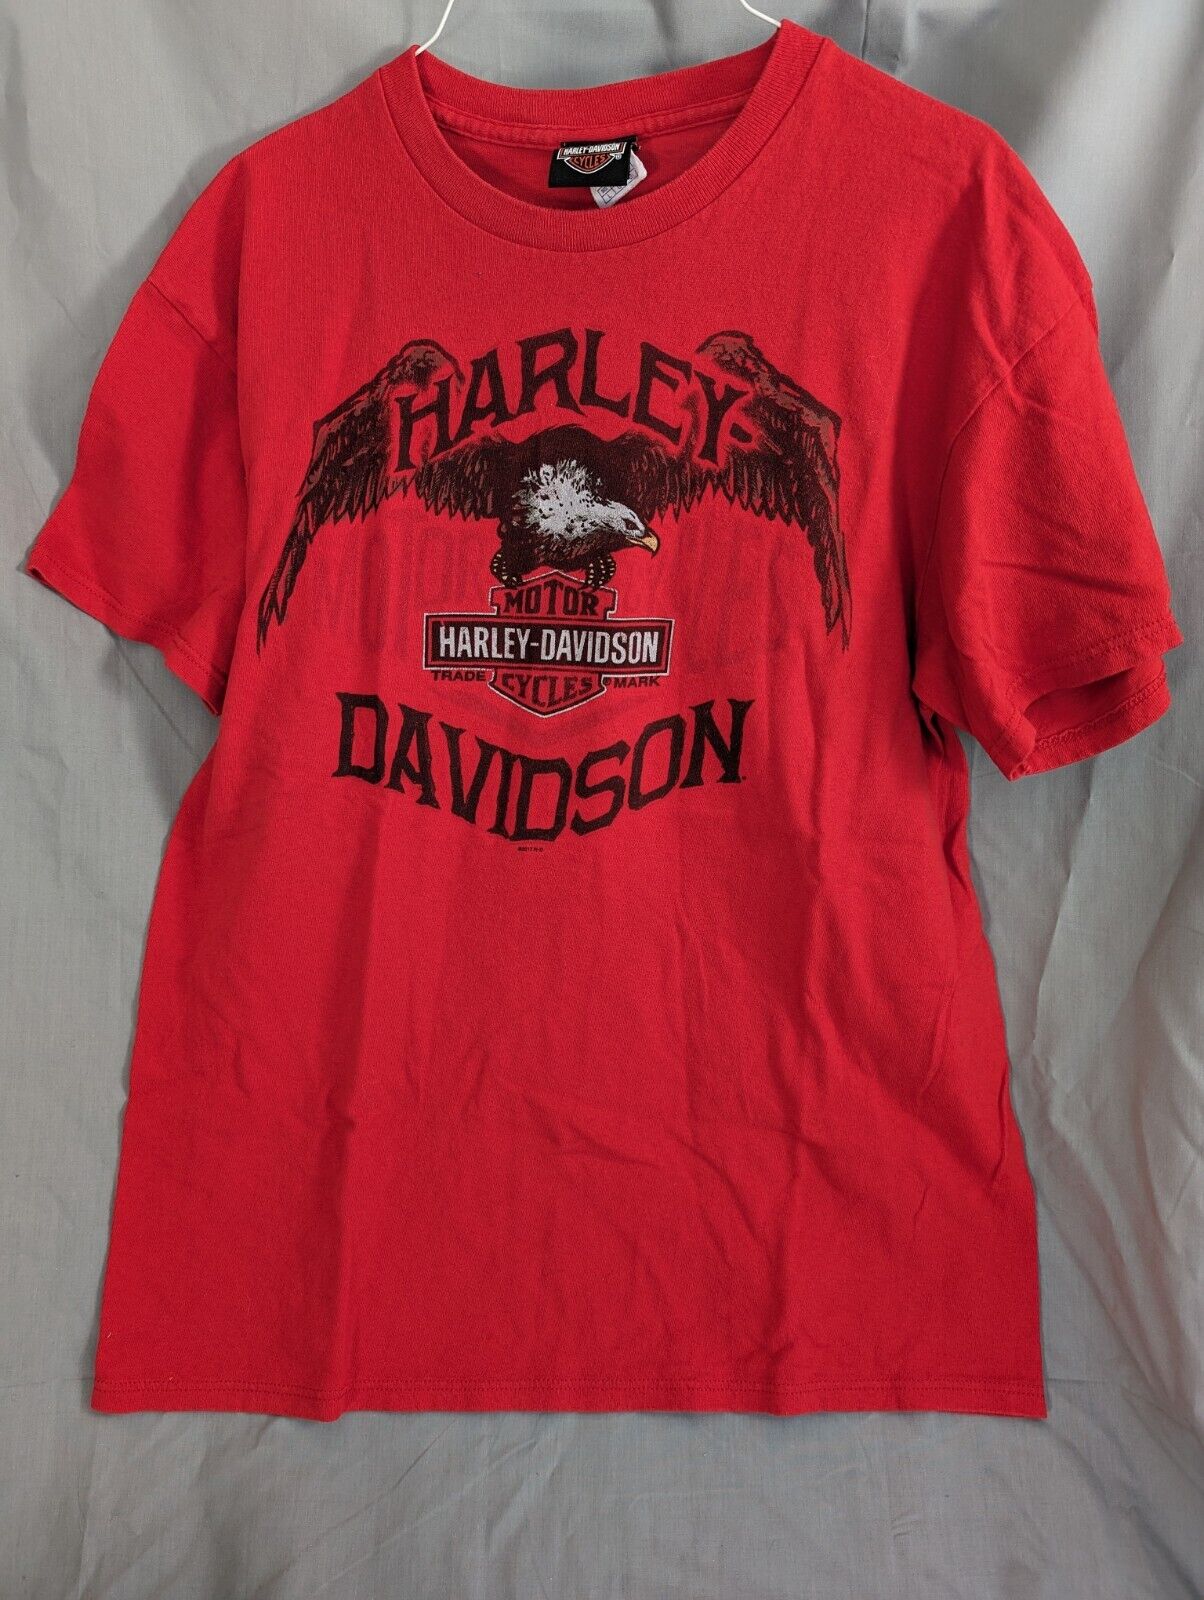 Lot of Four Harley Davidson T Shirts All Different